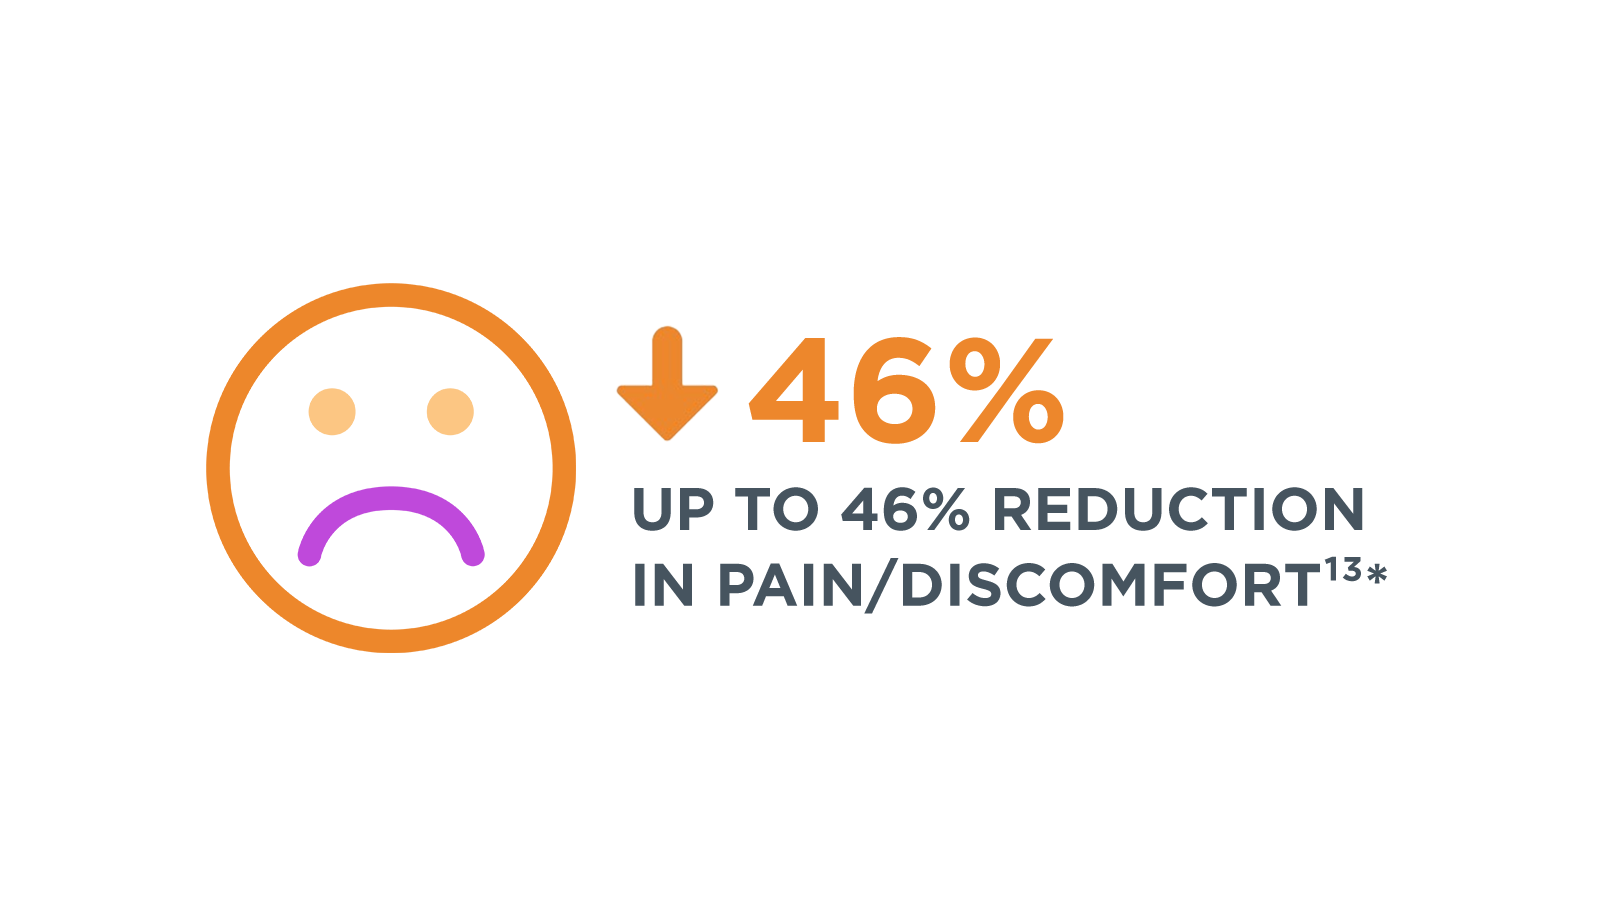 Infographic – Up to 46% reduction in  pain/discomfort. See footnote.